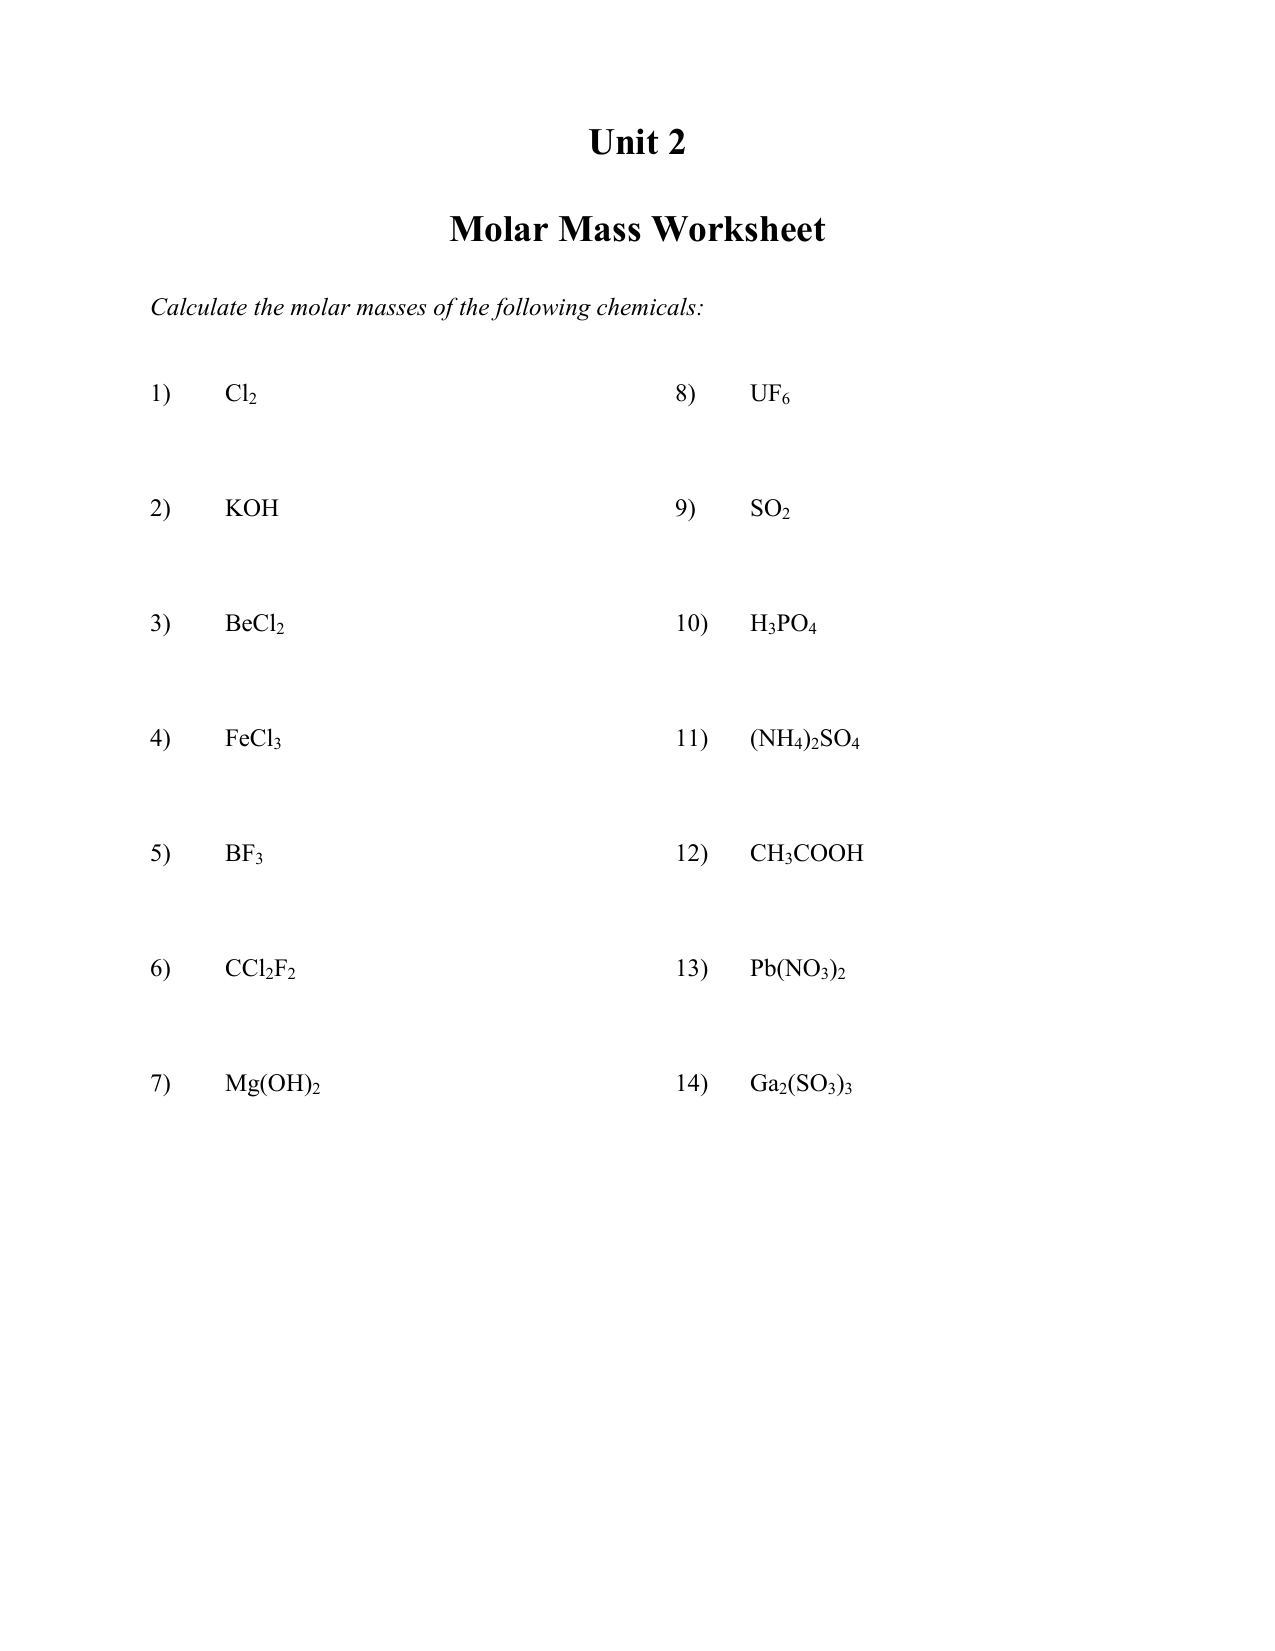 worksheets-for-unit-2-molar-mass-to-stoichiometry